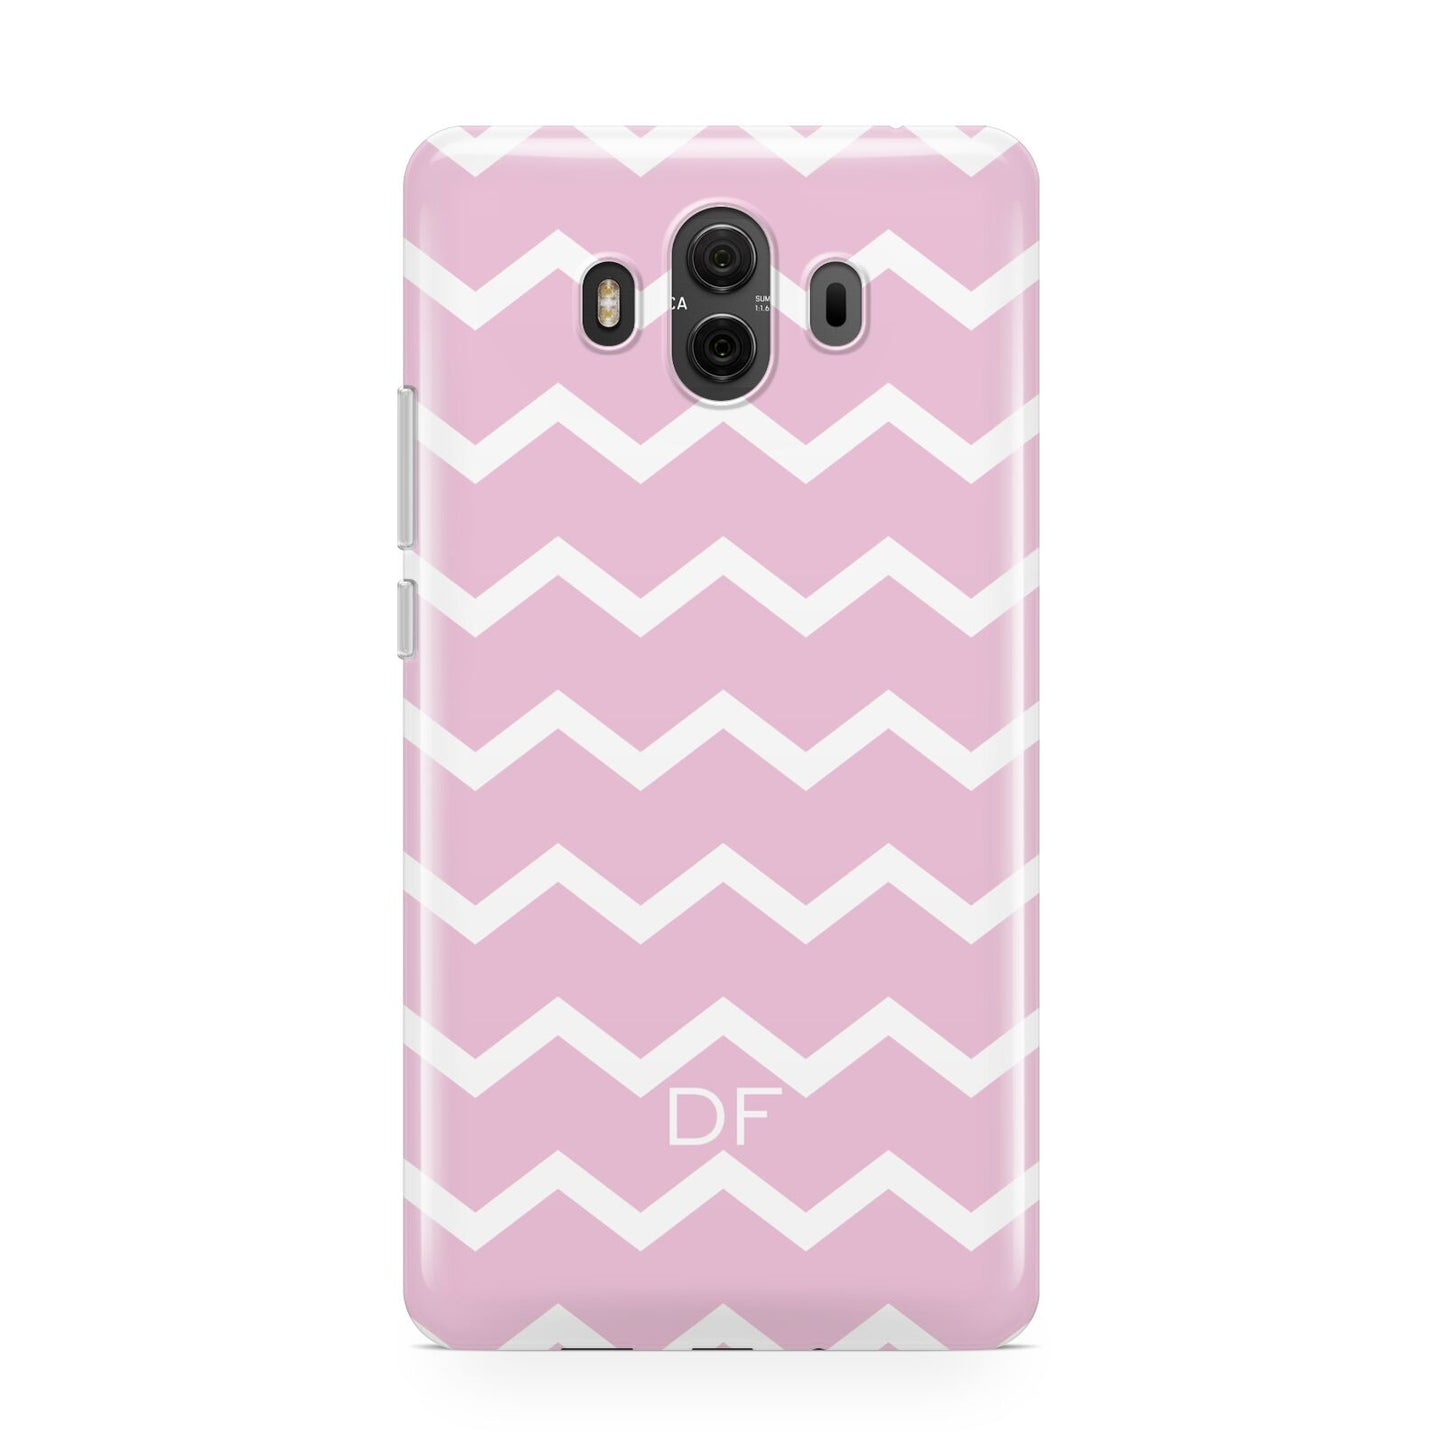 Personalised Chevron Pink Huawei Mate 10 Protective Phone Case